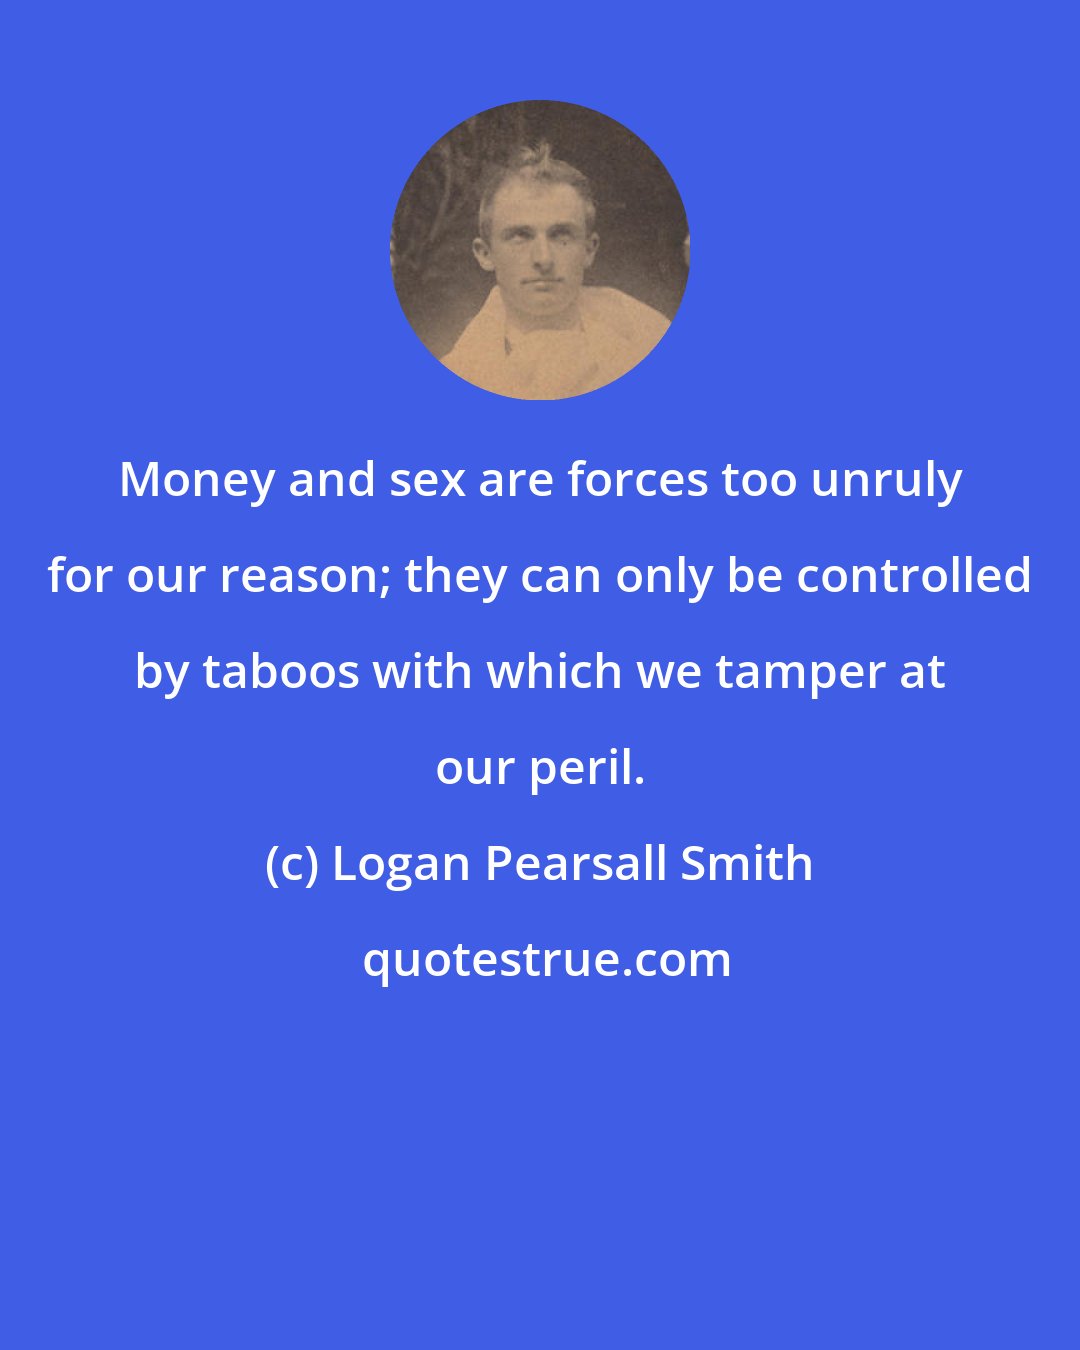 Logan Pearsall Smith: Money and sex are forces too unruly for our reason; they can only be controlled by taboos with which we tamper at our peril.